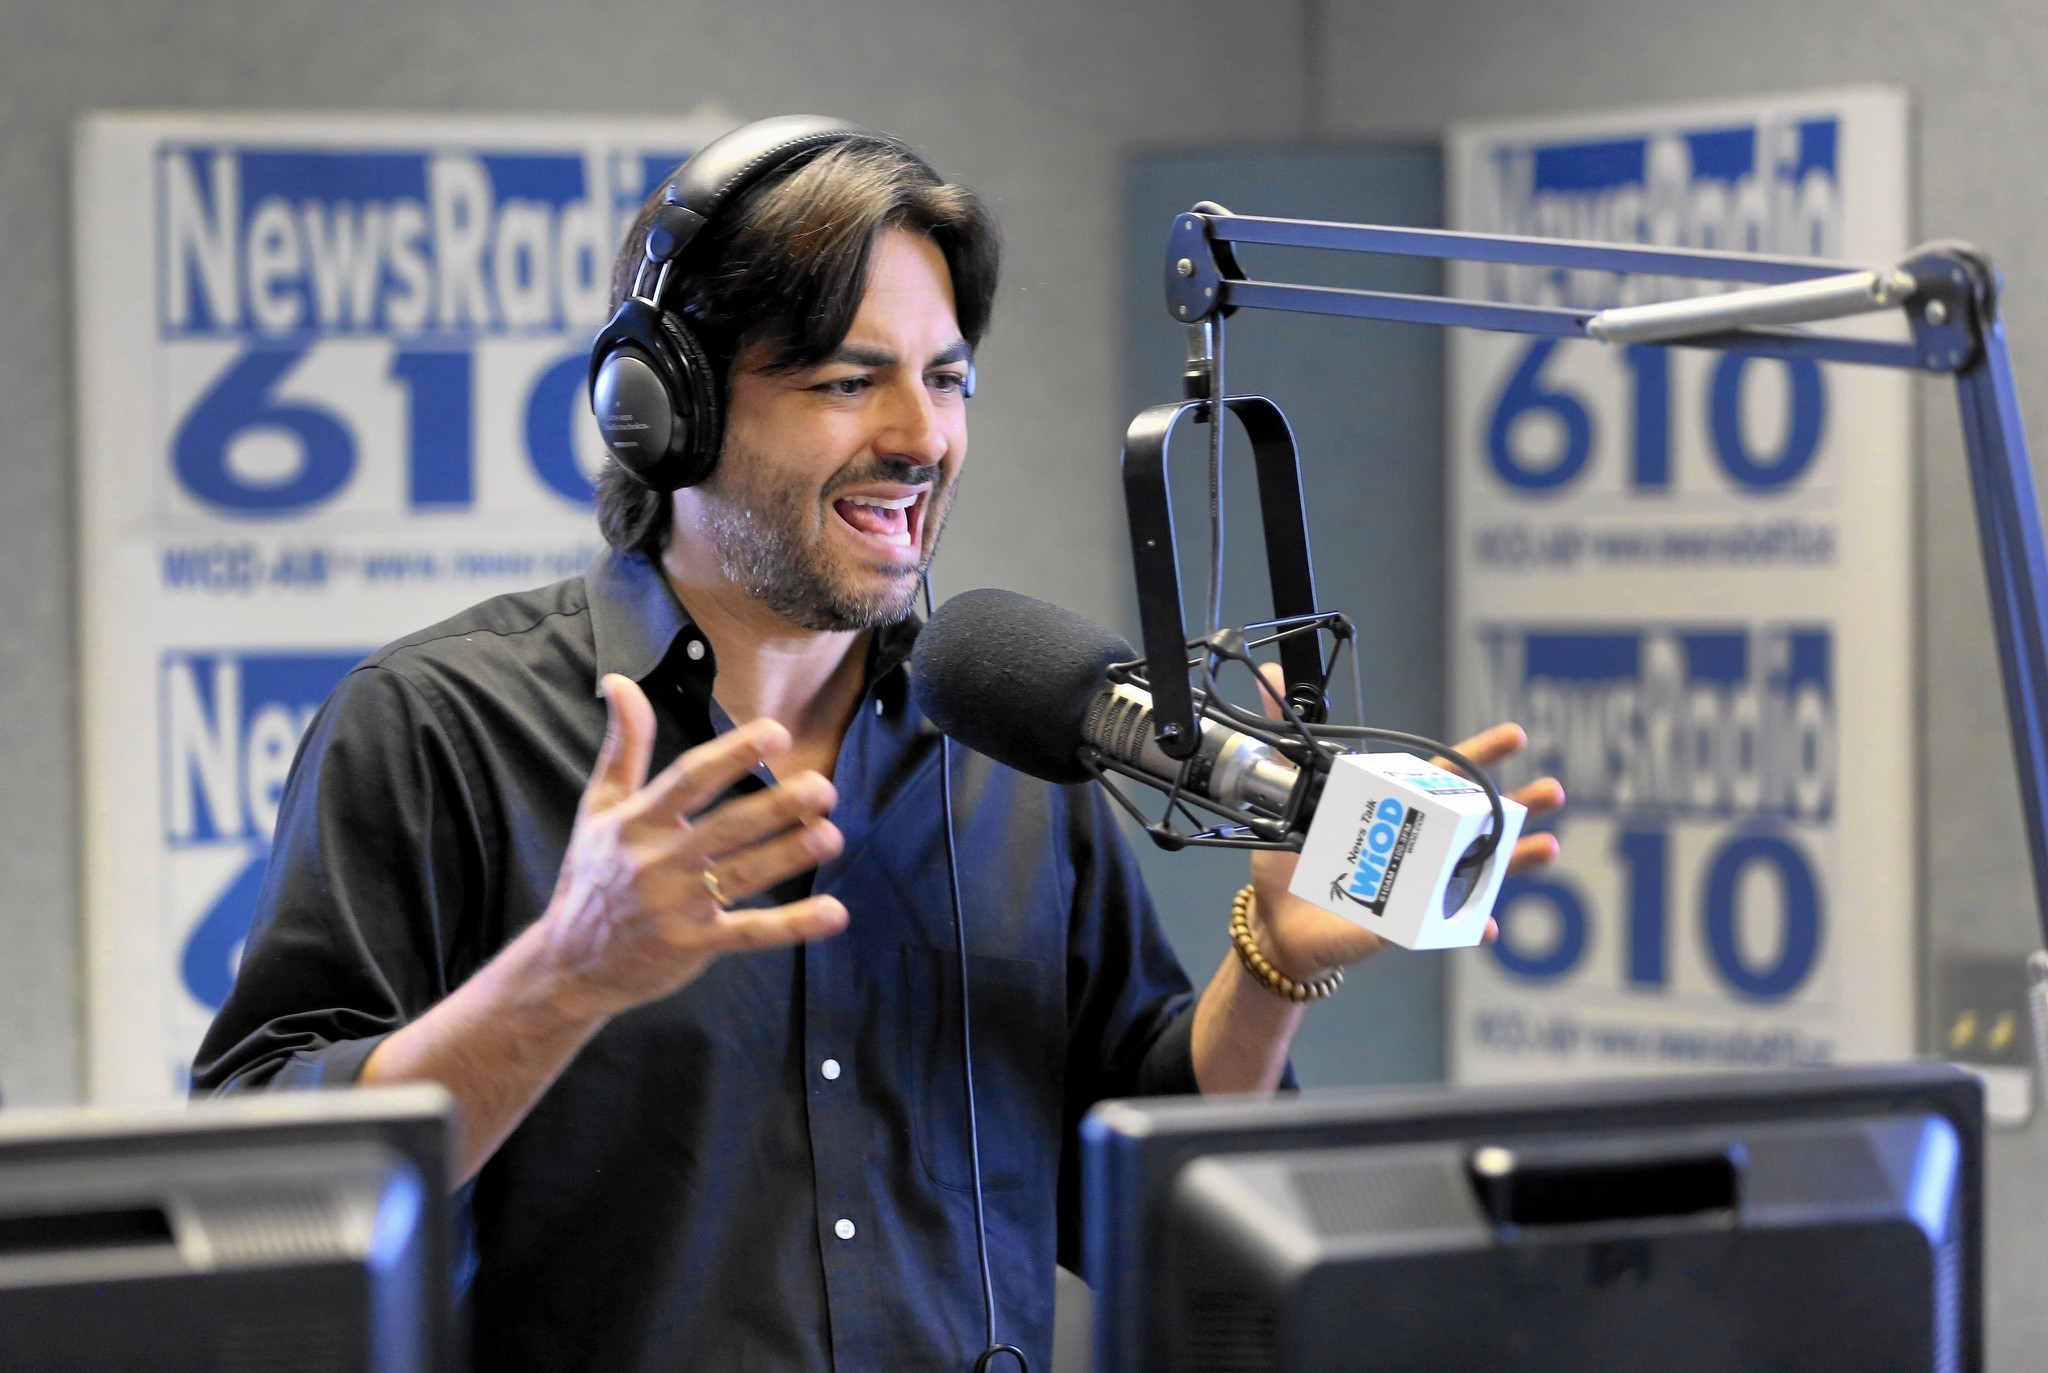 Man of the mornings, Fernand Amandi talks with South Florida on WIOD - Sun Sentinel